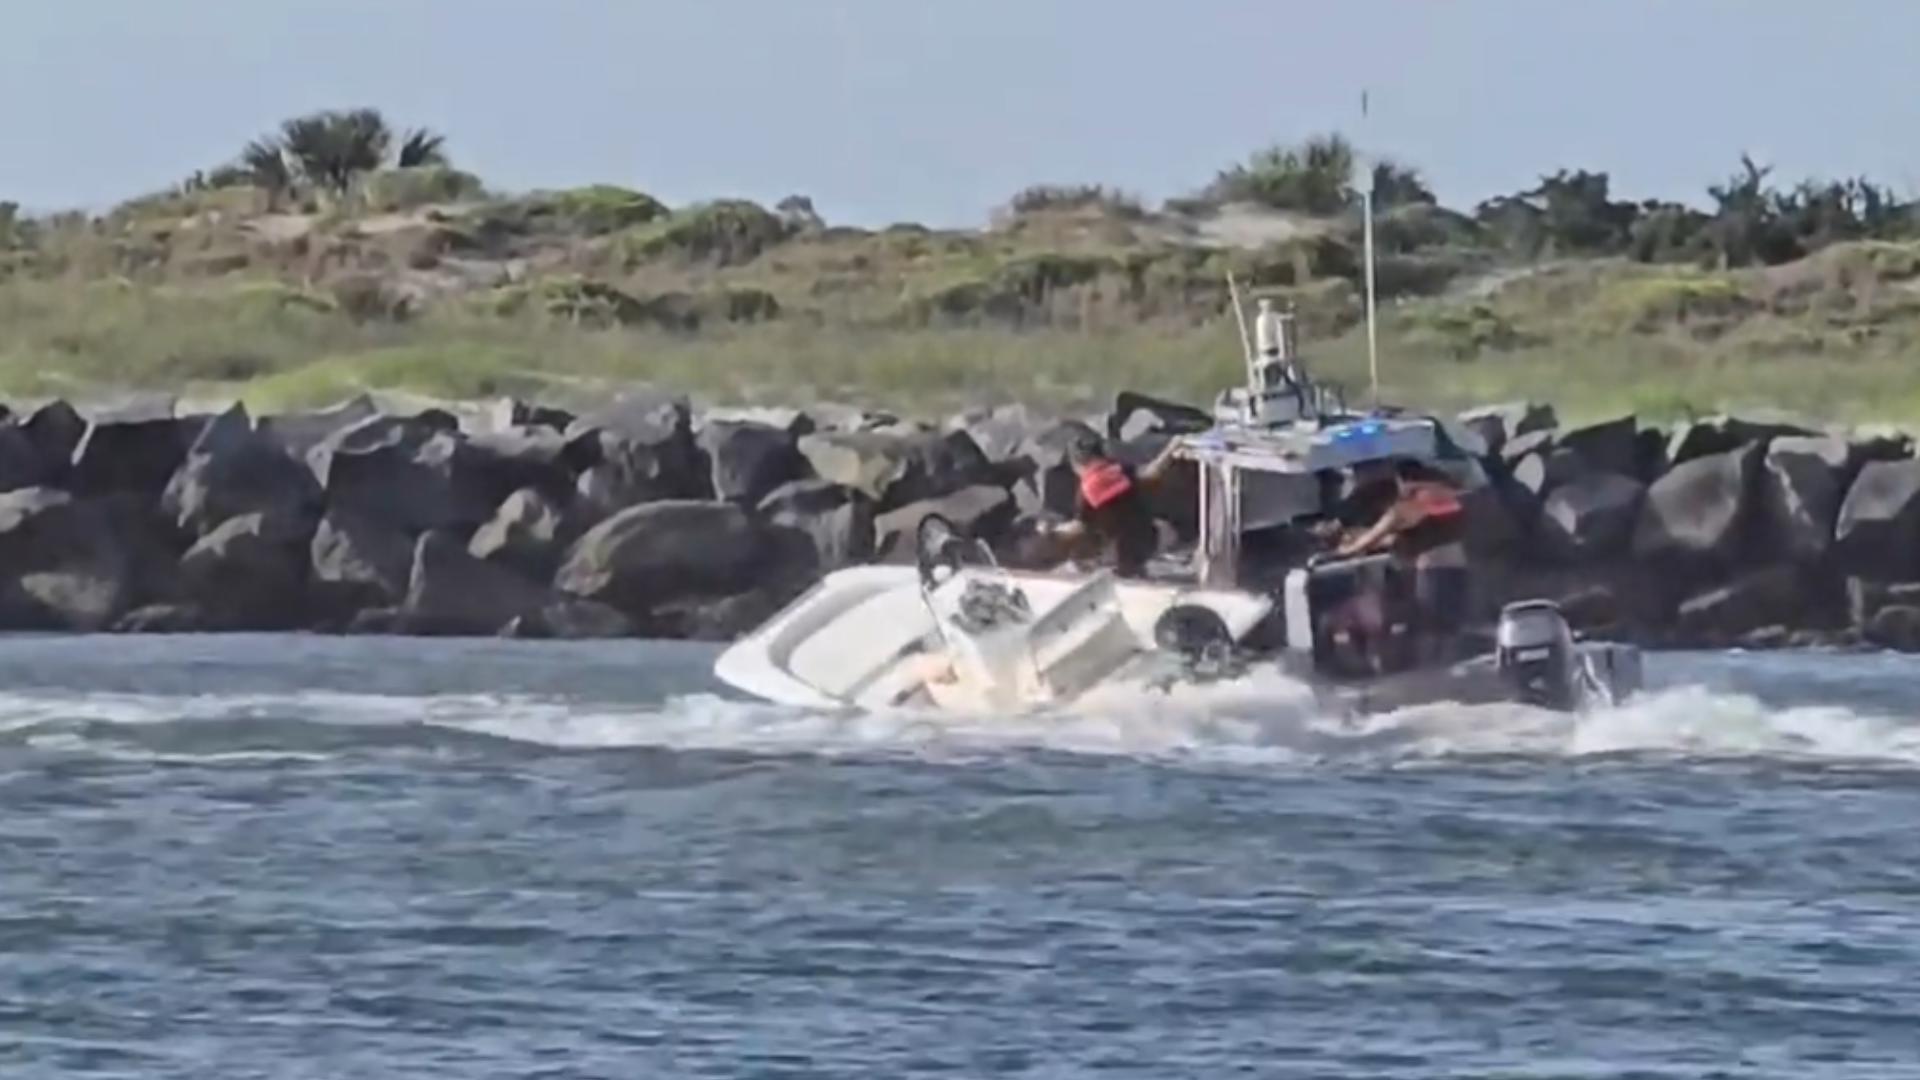 St. Johns County Fire Rescue corralled an unoccupied, fast-moving boat in the Vilano Inlet after the owner was tossed while fishing.